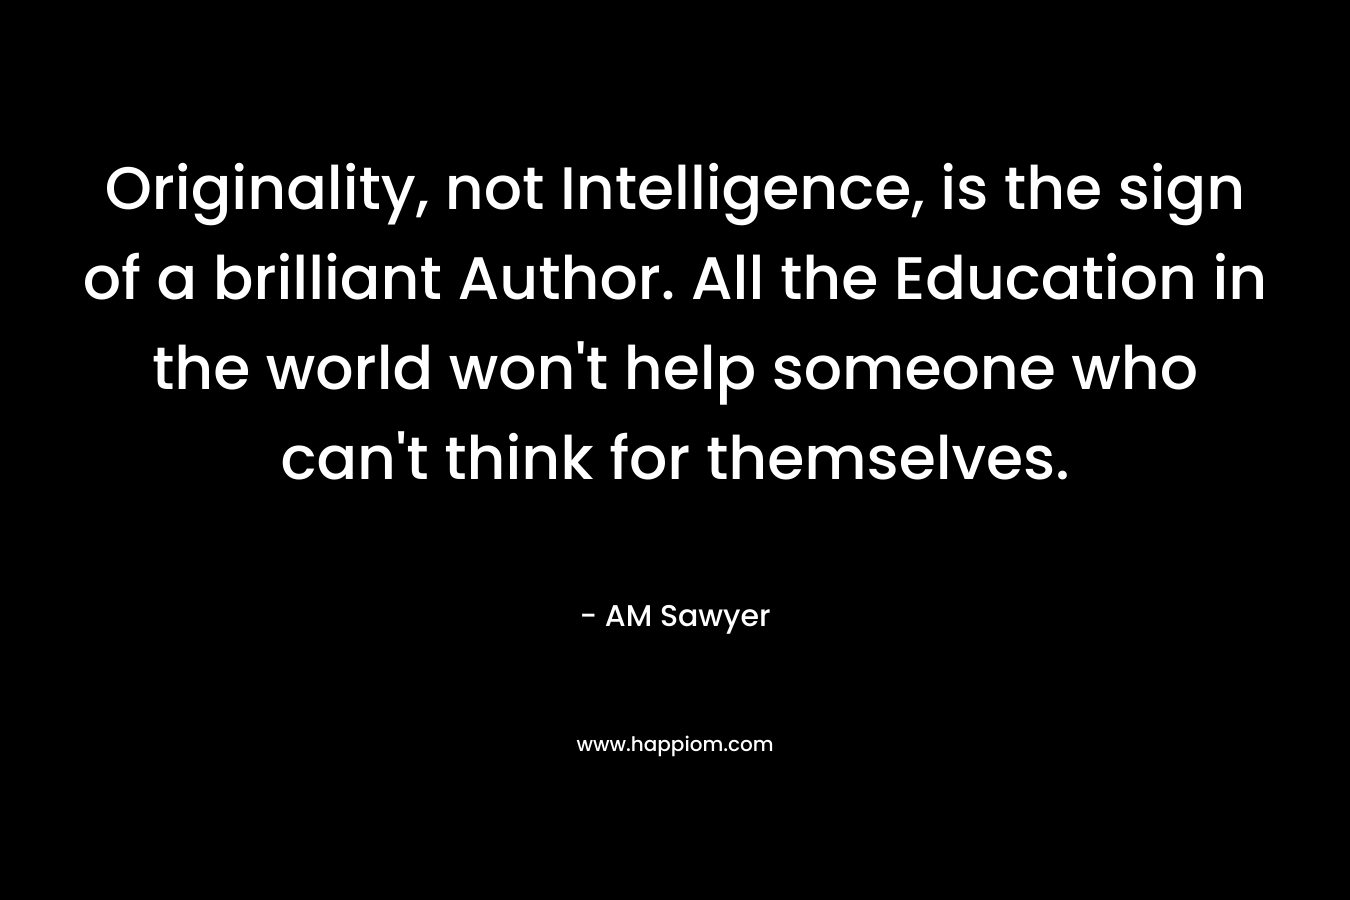 Originality, not Intelligence, is the sign of a brilliant Author. All the Education in the world won’t help someone who can’t think for themselves. – AM Sawyer